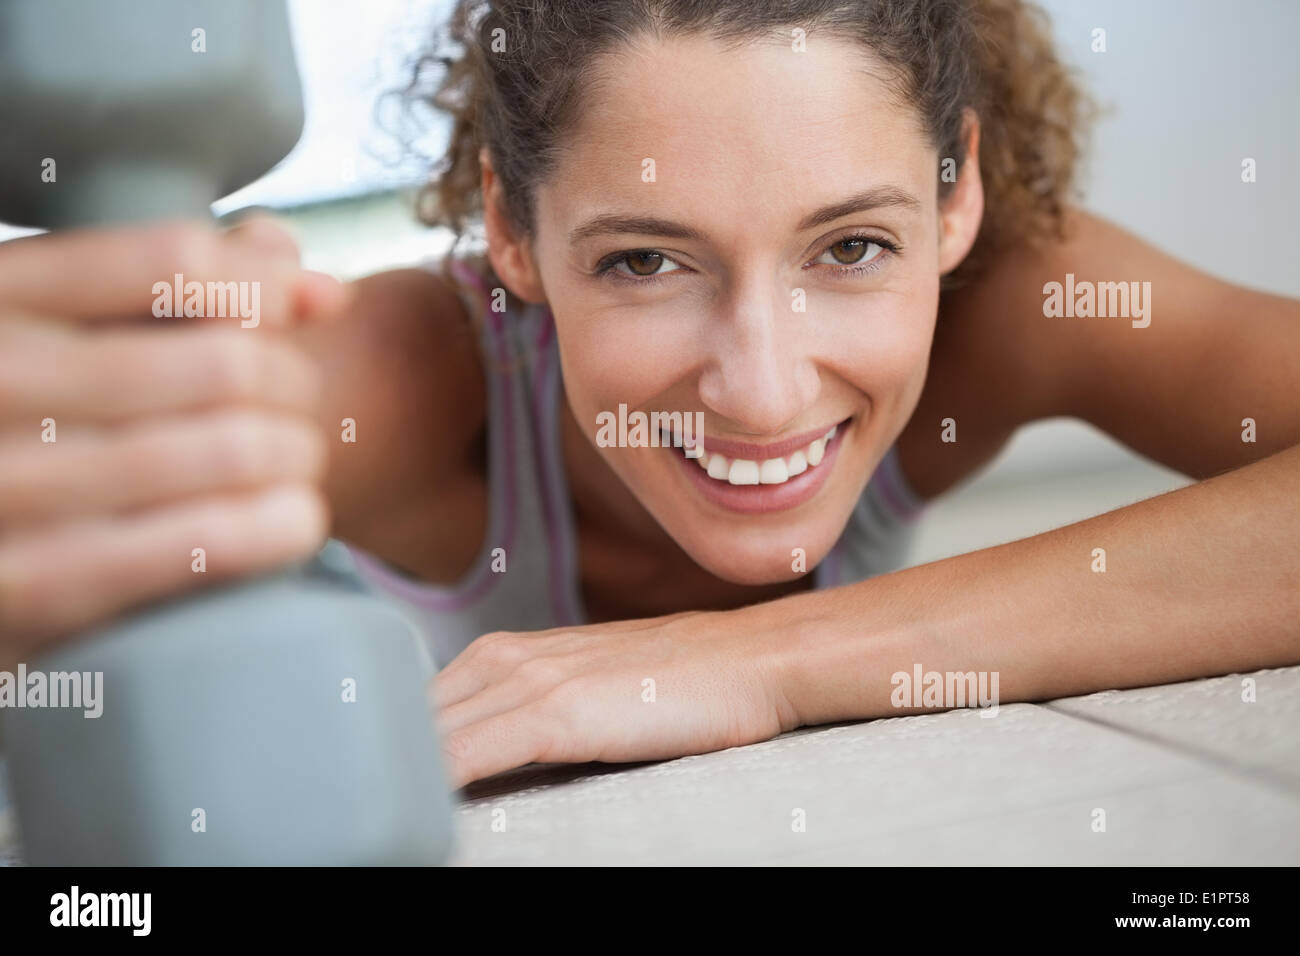 Fit woman smiling at camera holding dumbbell Banque D'Images